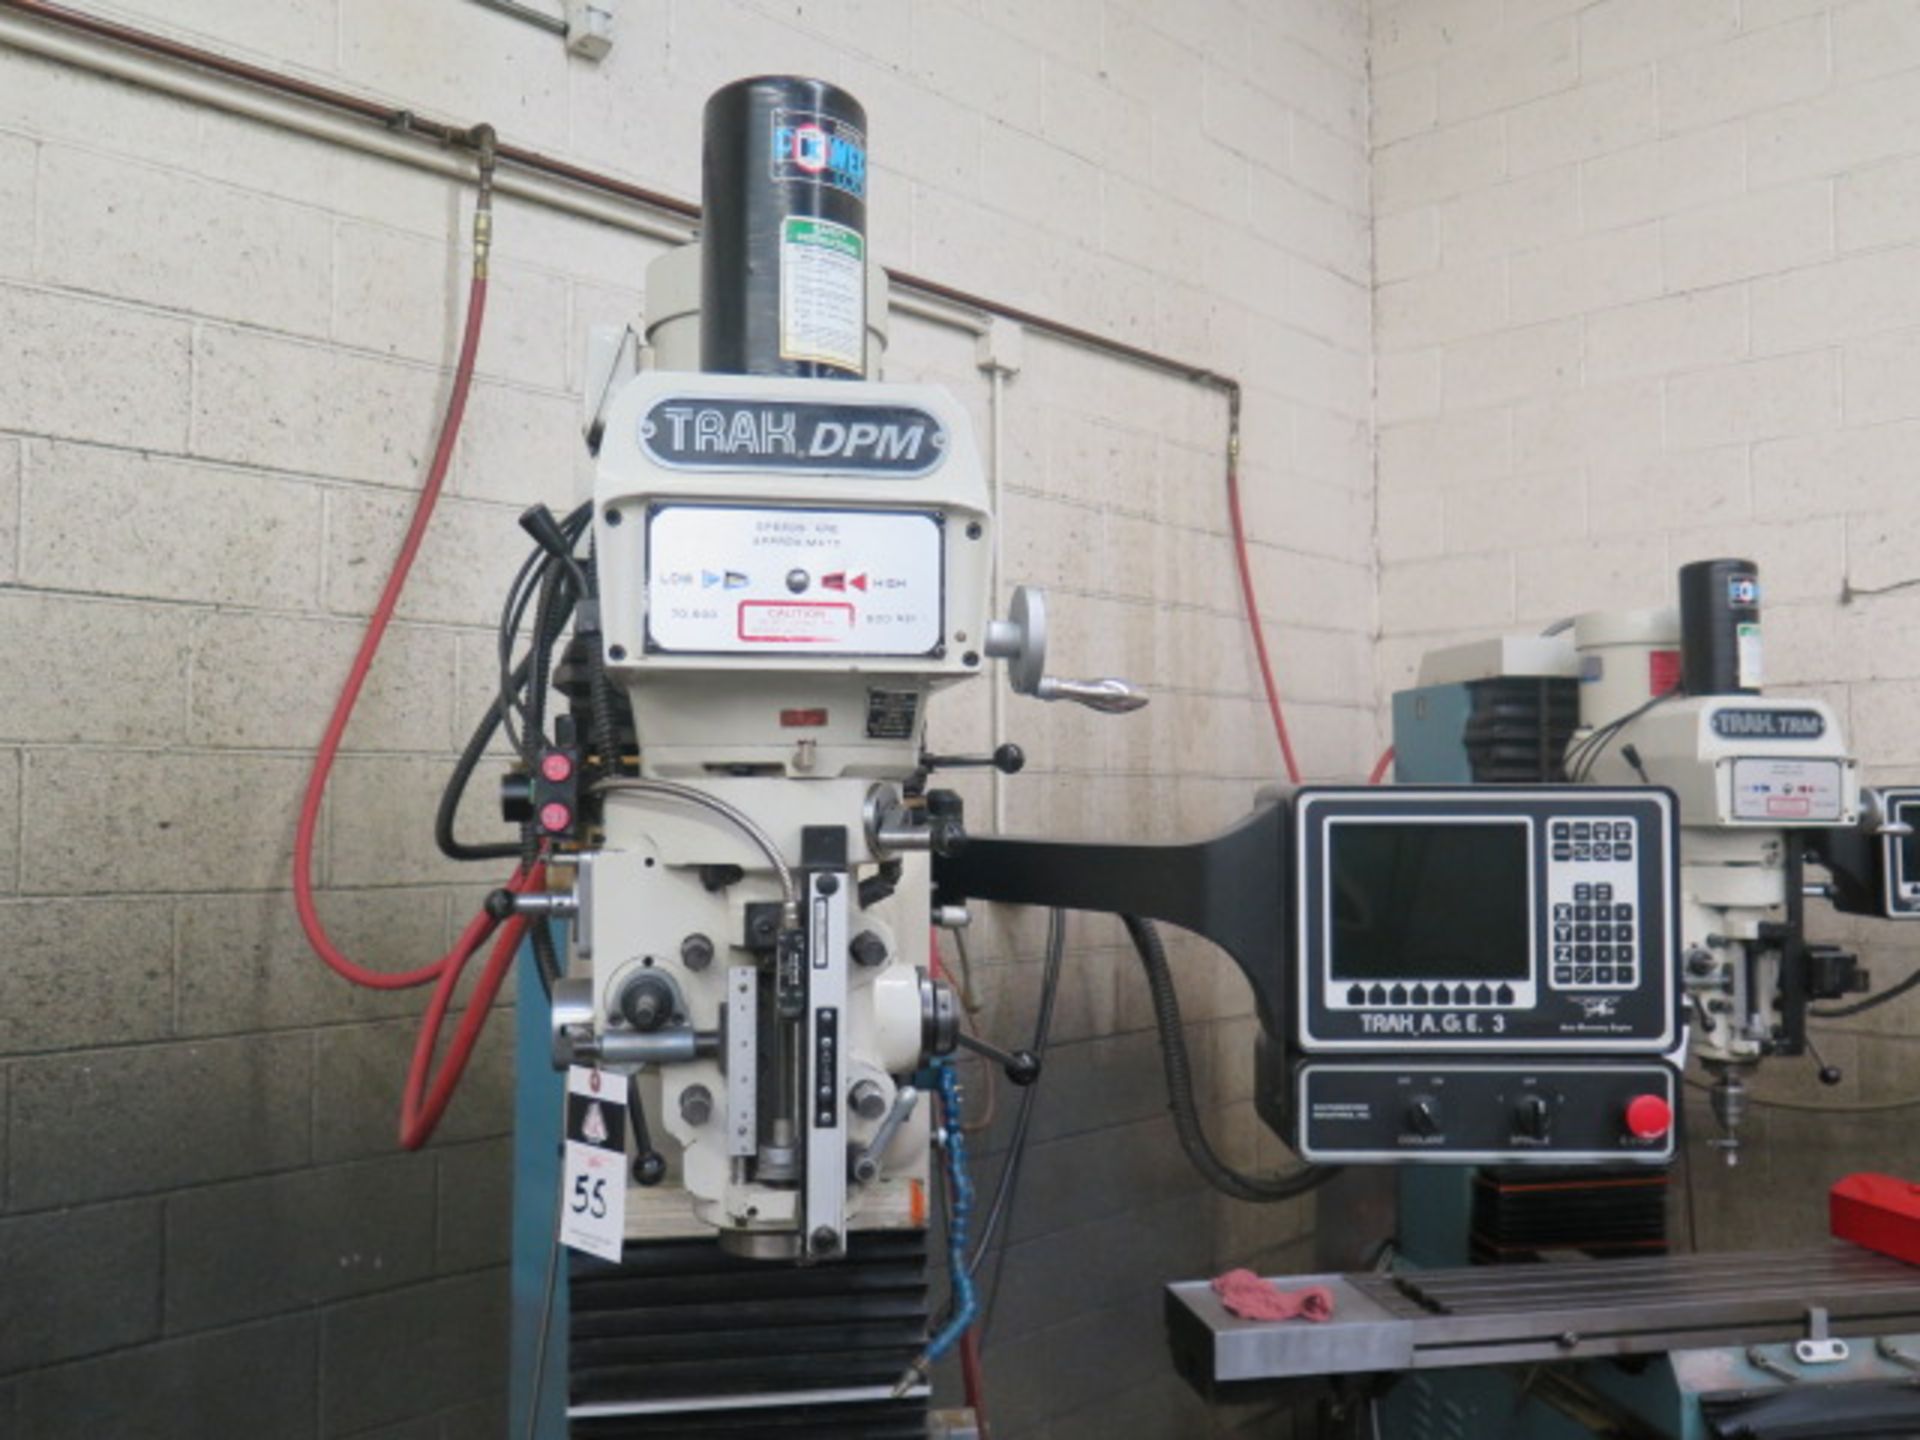 Southwestern Industries TRAK-DPM CNC Mill s/n 97-3095 w/ Proto Trak A.G.E 3 Controls, 3Hp,SOLD AS IS - Image 4 of 15